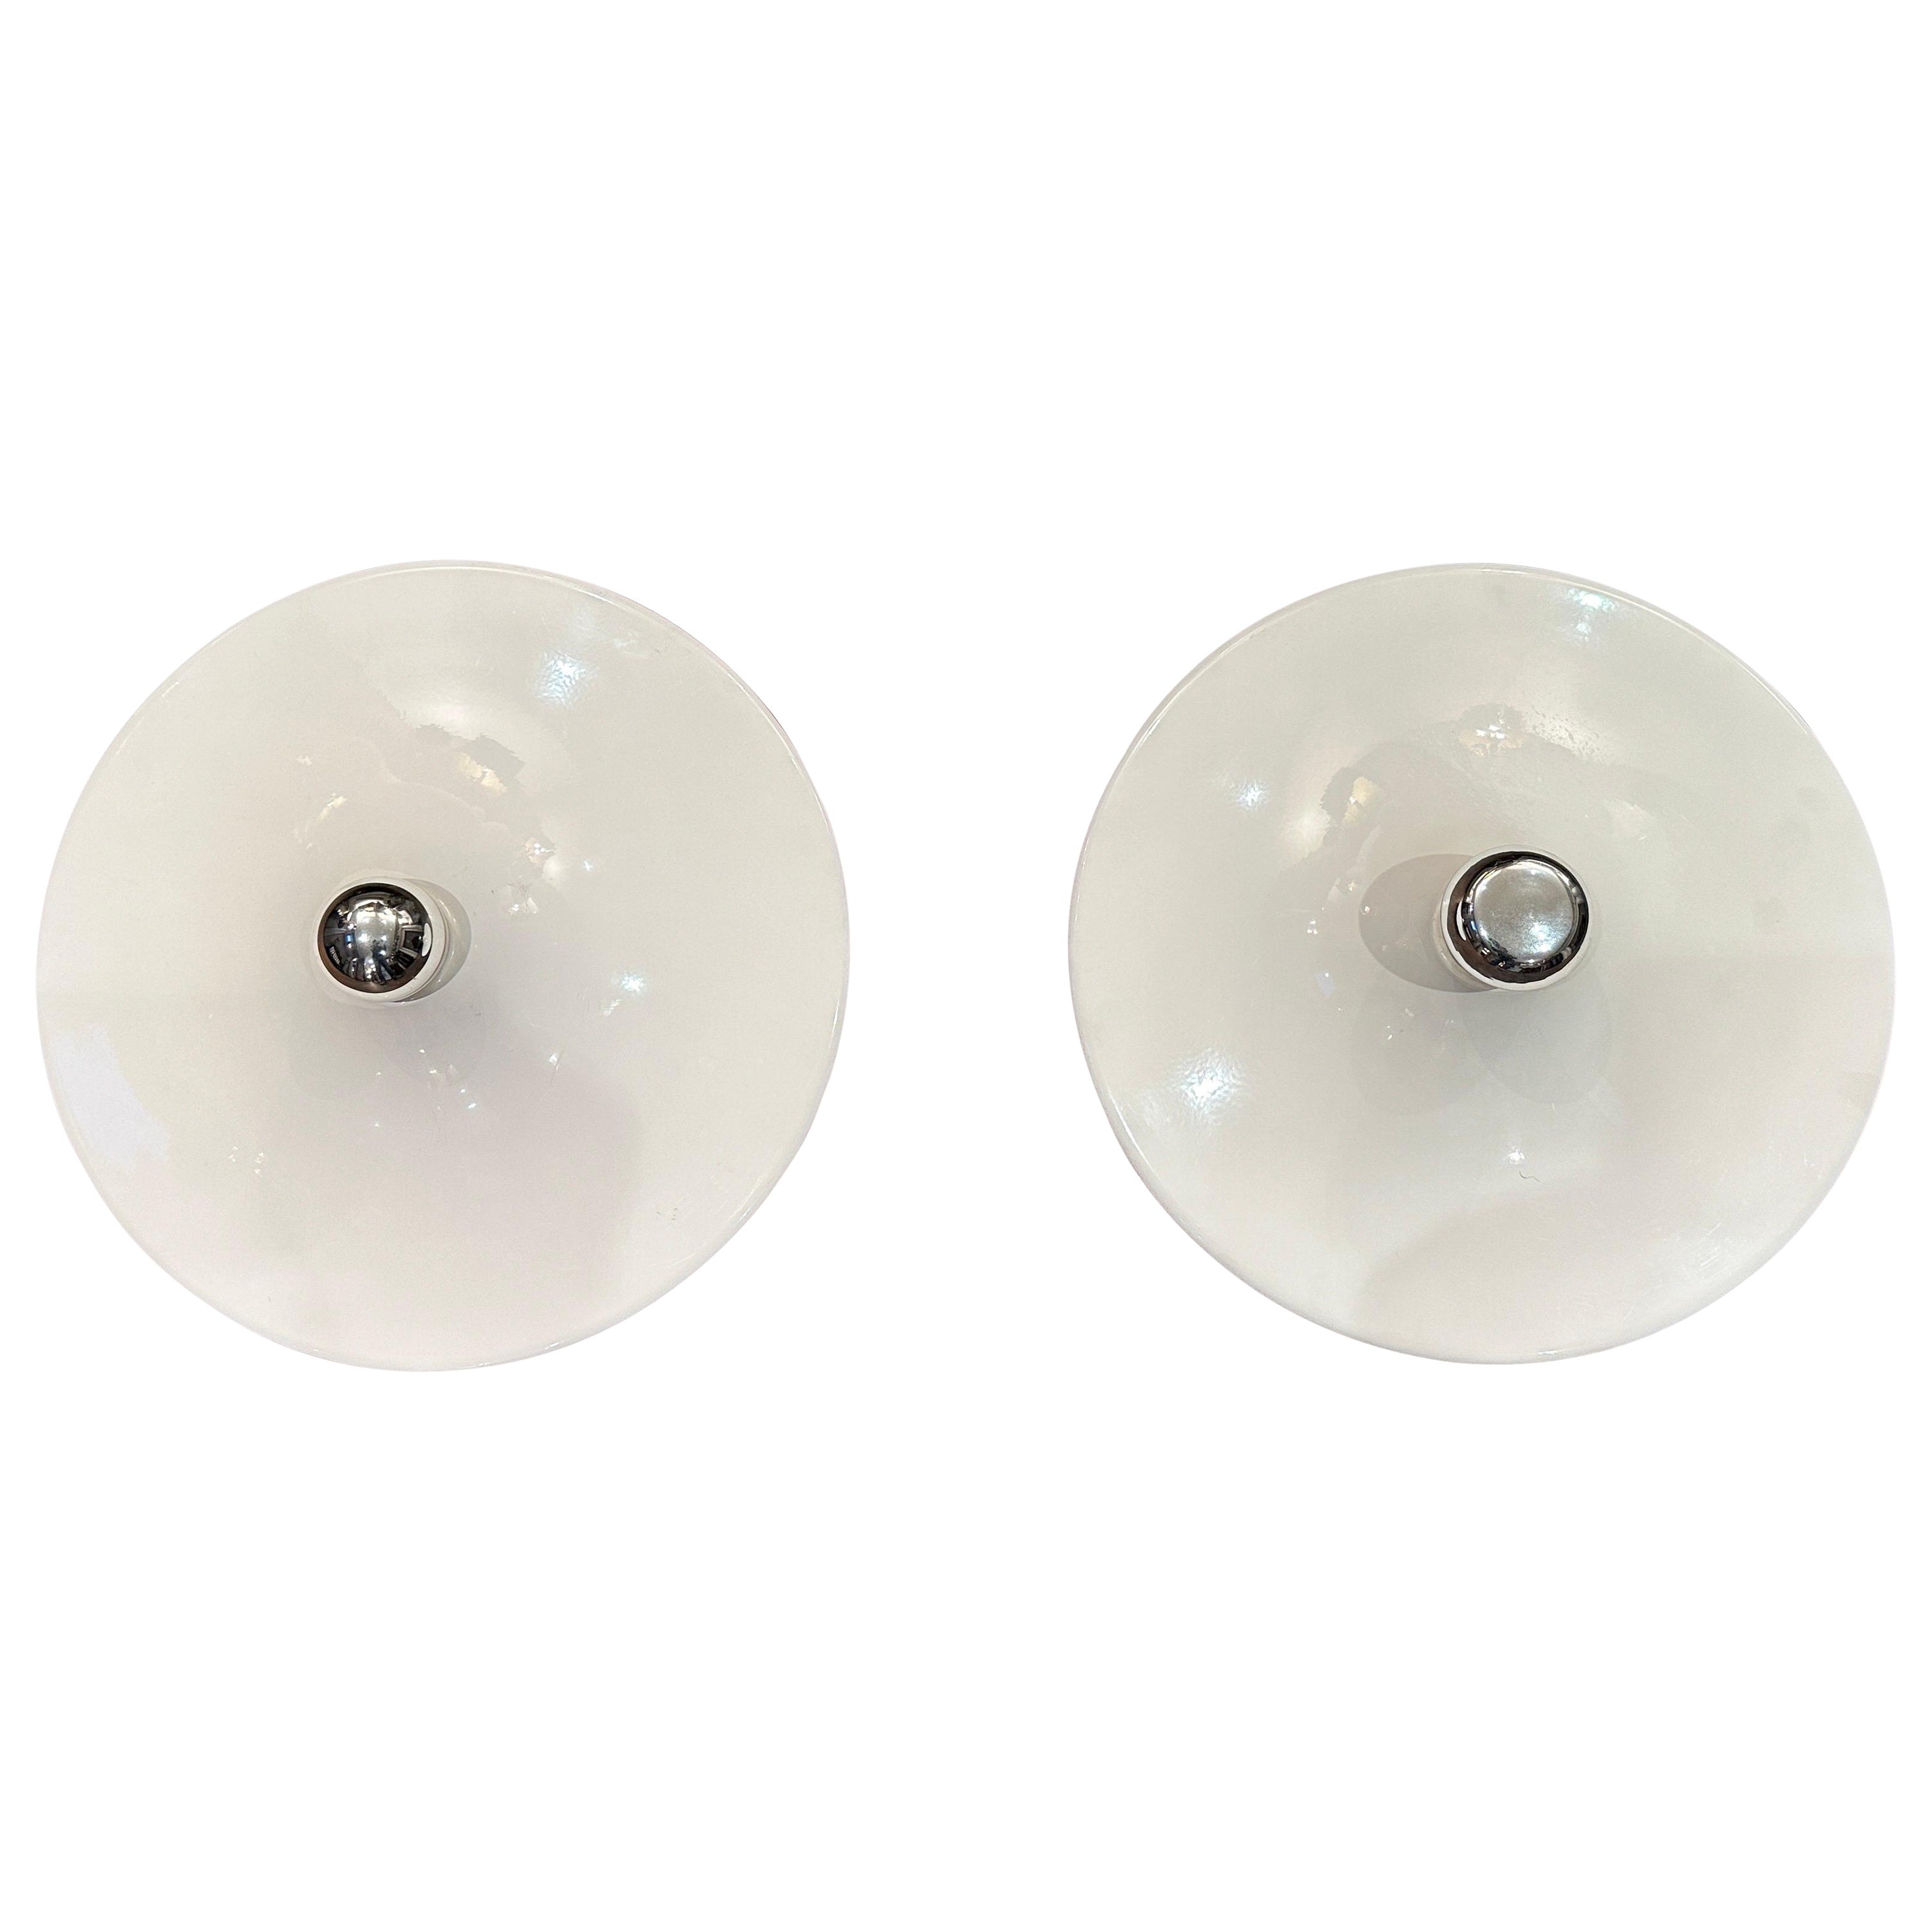 A pair Of Disc Ceiling or Wall Lights By G. Gorgoni For Stilnovo For Sale